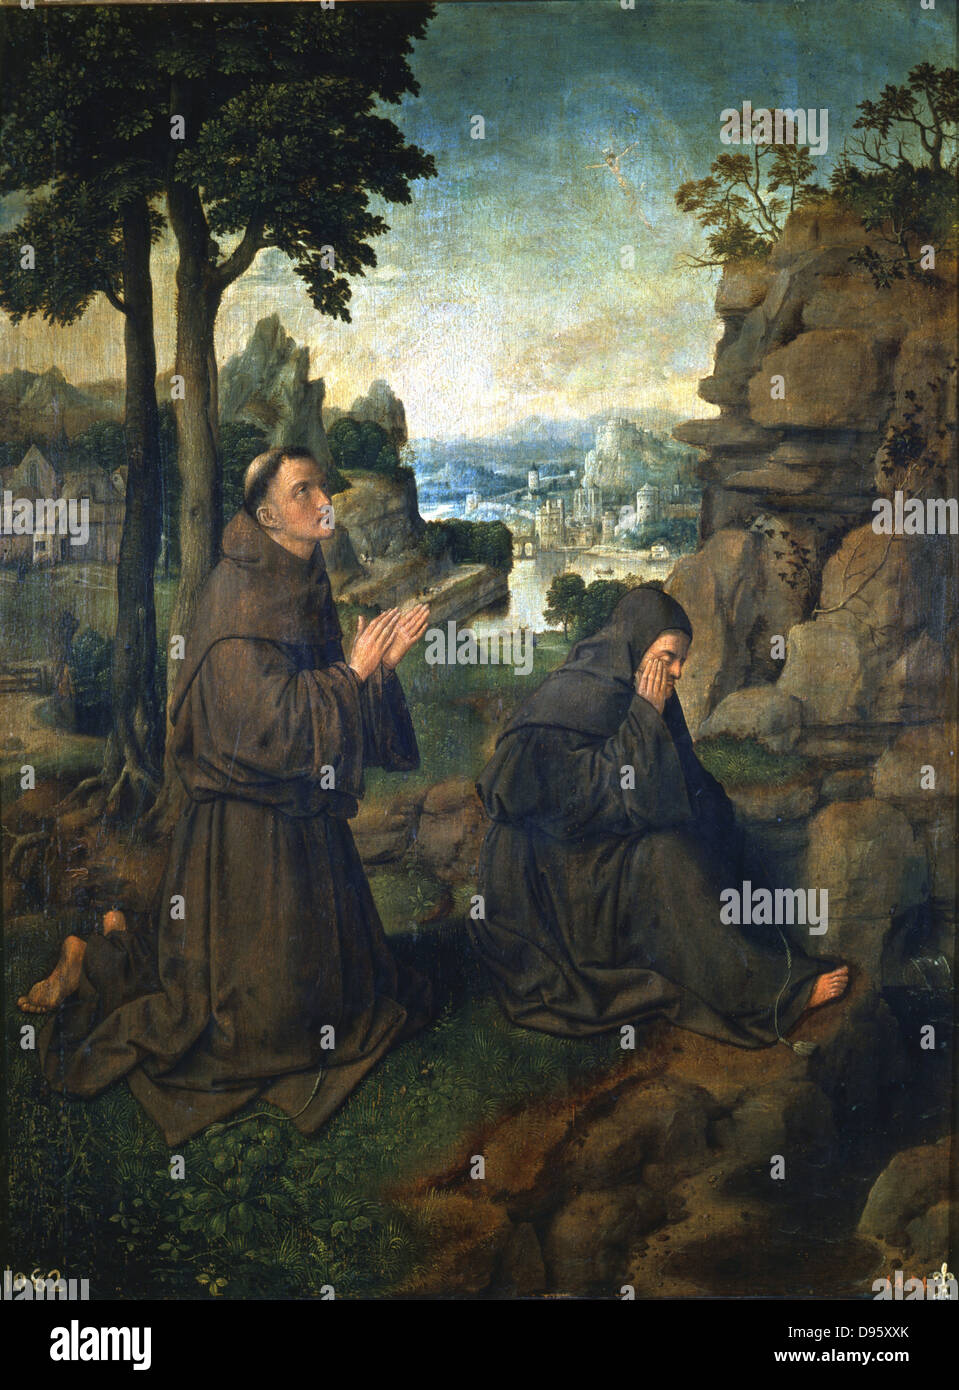 St Francis of Assisi and another Franciscan monk in the desert. Joachim D Patinir (c1490-c1524), Flemish artist. Prado, Madrid. Stock Photo